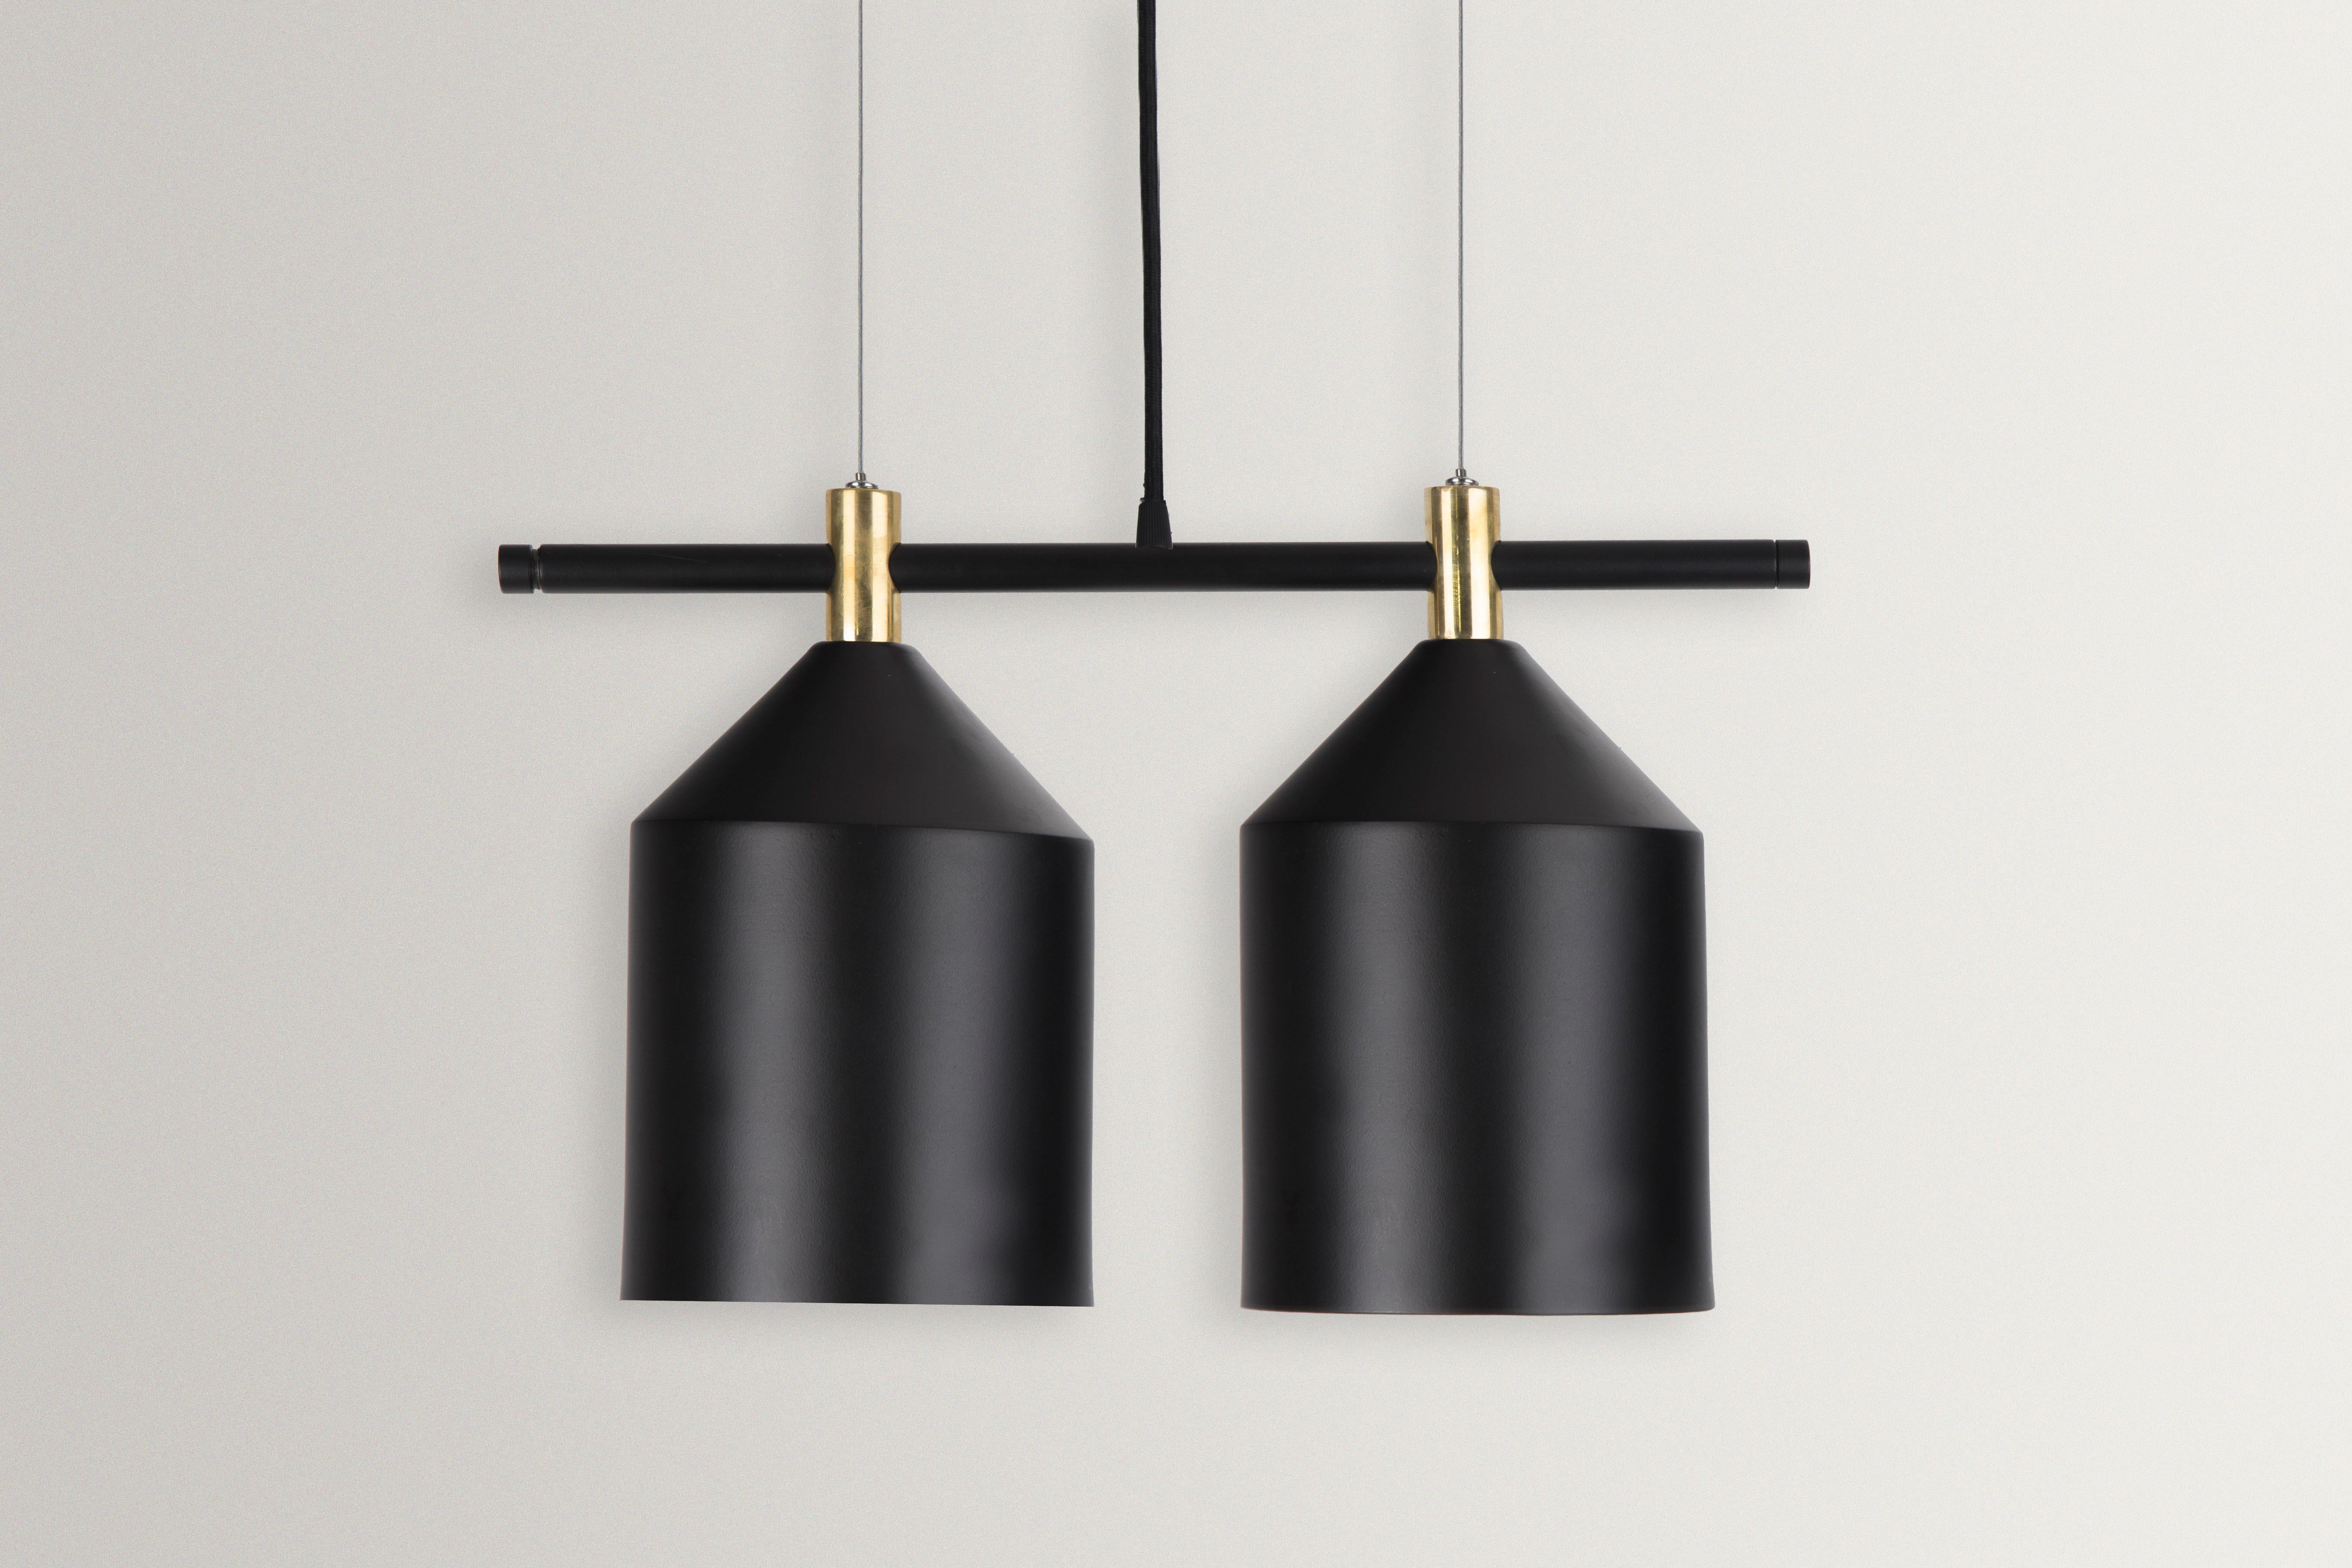 Unique 4 Tube pendant light by Hatsu
Dimensions: W 42 x H 26 cm 
Materials: Powdercoated Aluminium, Brass Fabric Cord

Hatsu is a design studio based in Mumbai that creates modern lighting that are unique and immediately recognisable. We started